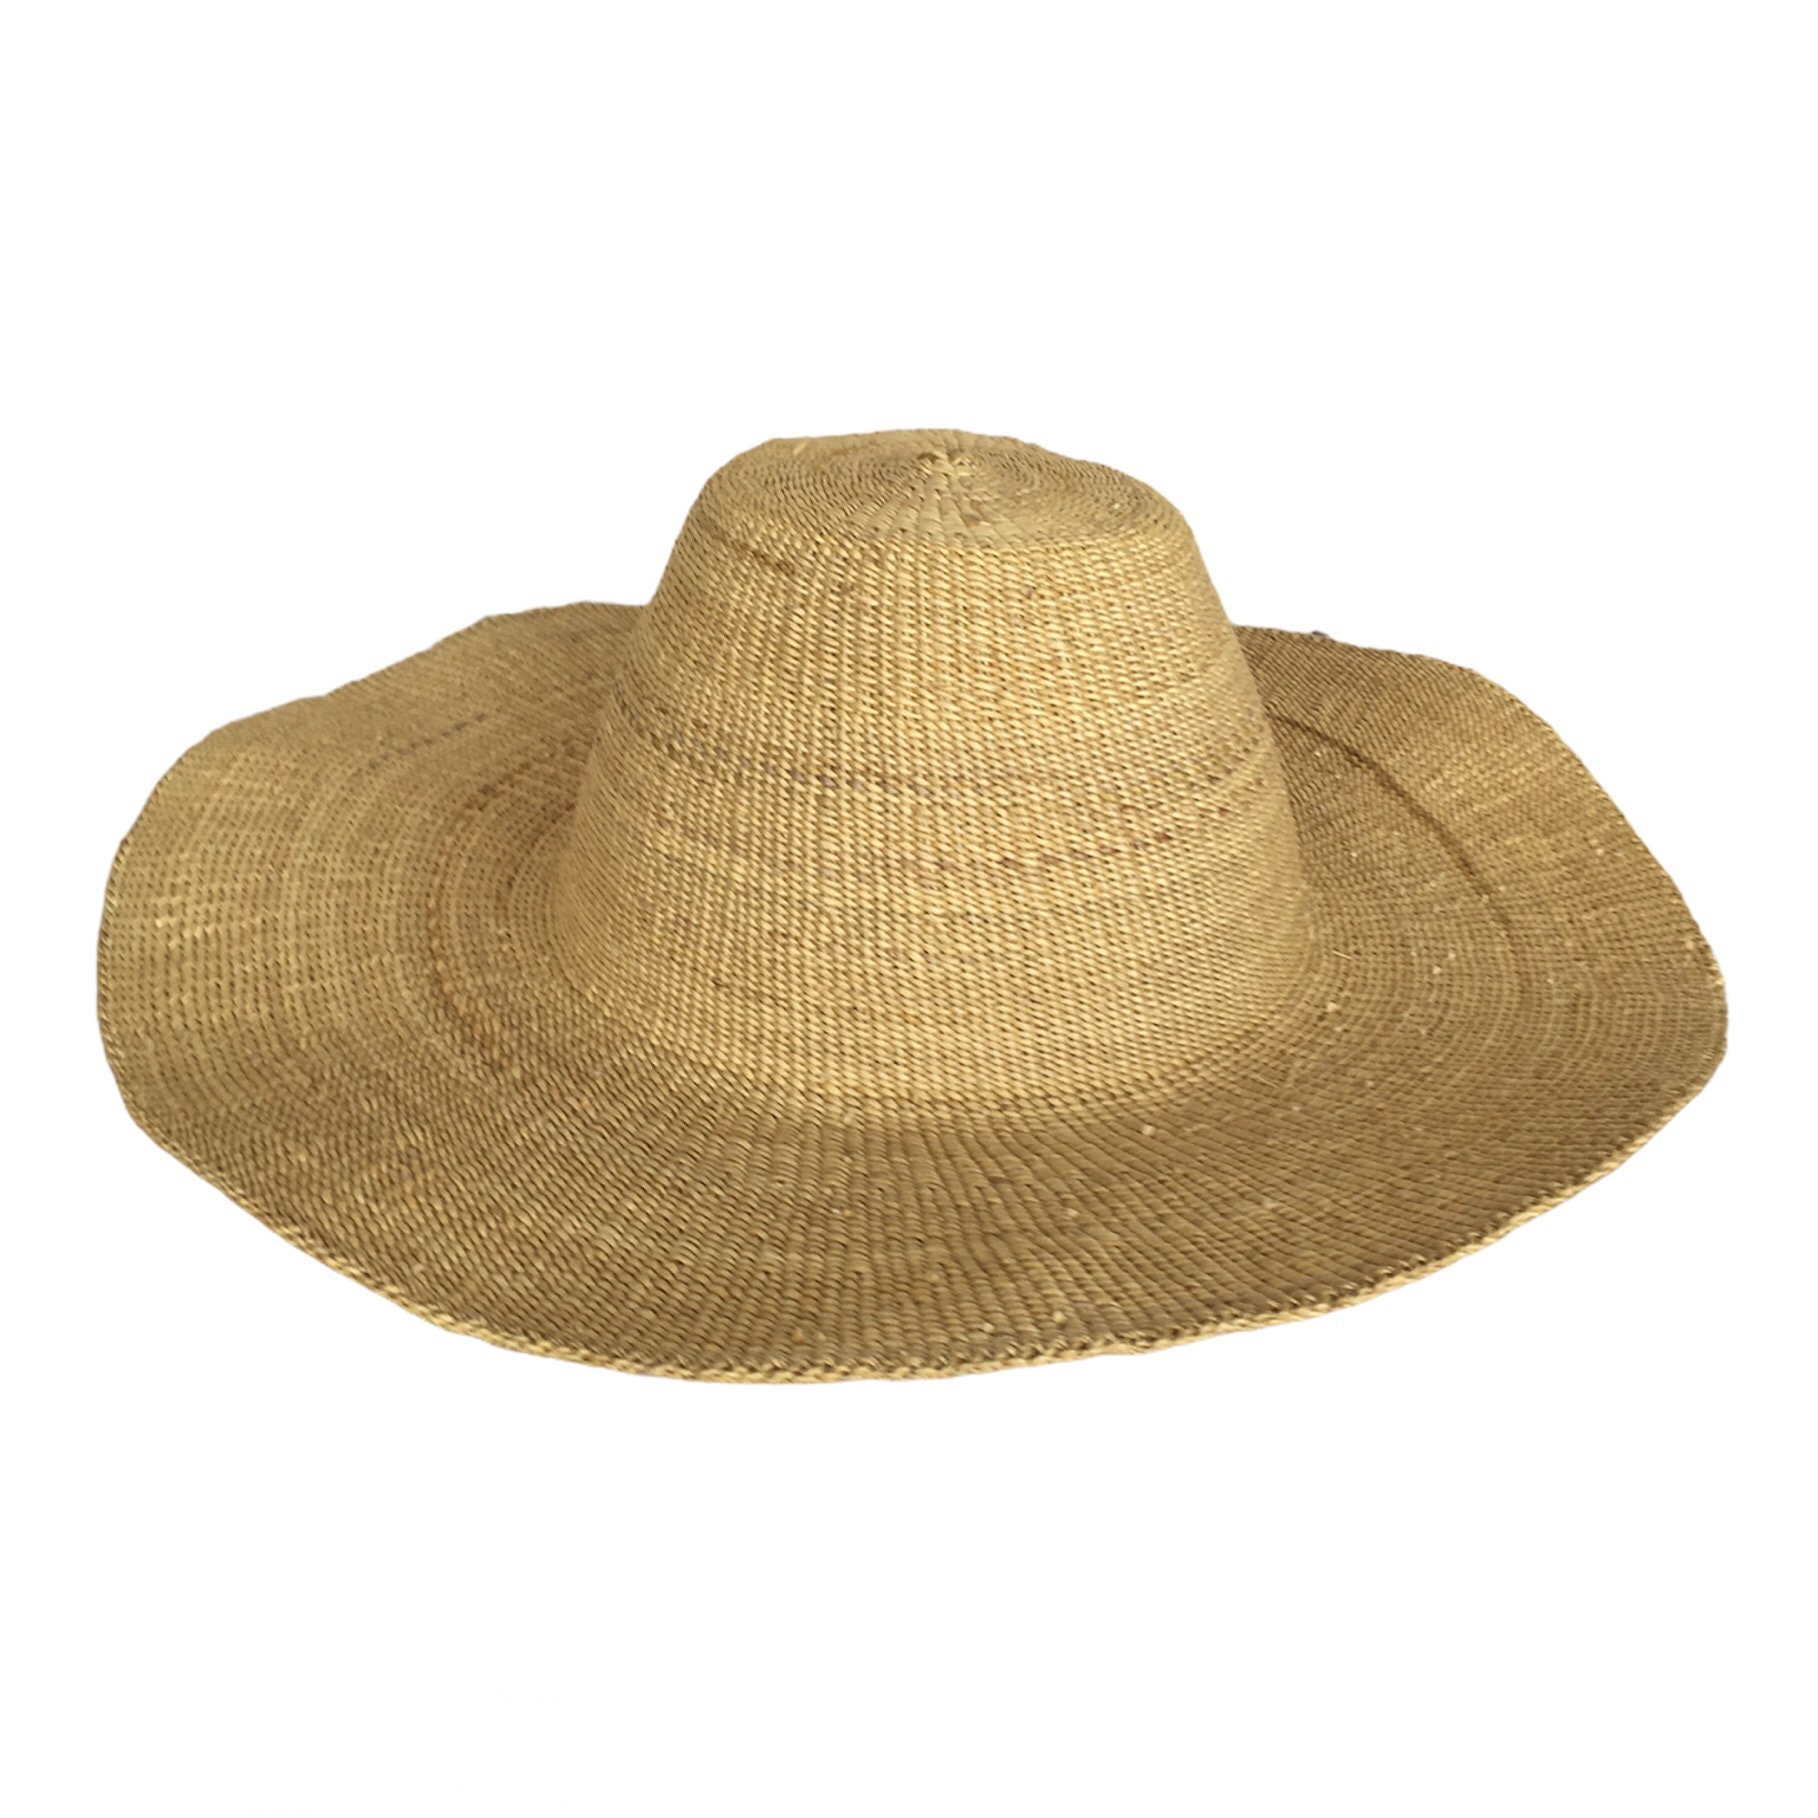 Natural woven hat, African Straw hat, African sun hat, large straw hat,  Farmers sun hat, Bolga hats